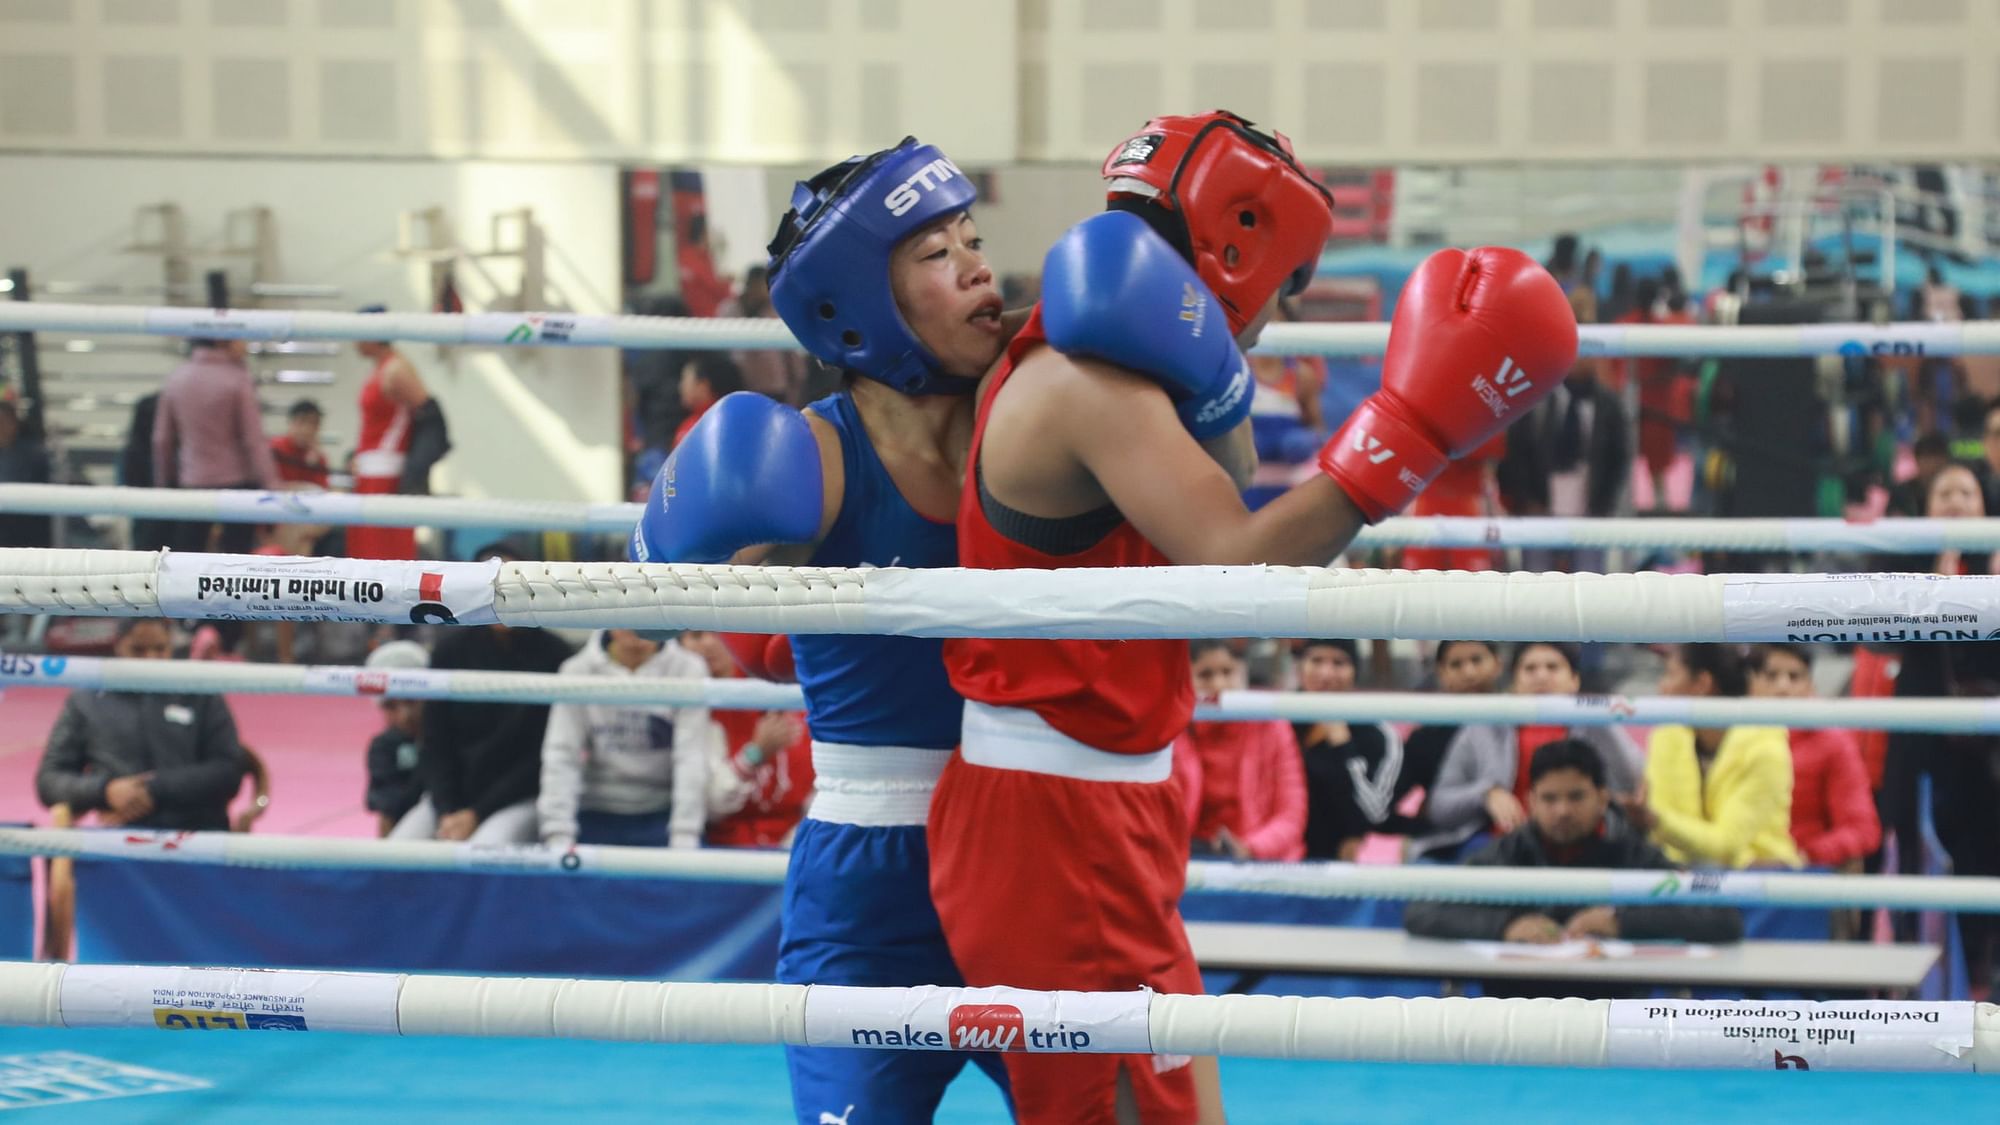 Mary Kom was declared winner in a split 9-1 decision in the selection trial bout against Nikhat Zareen on Saturday.